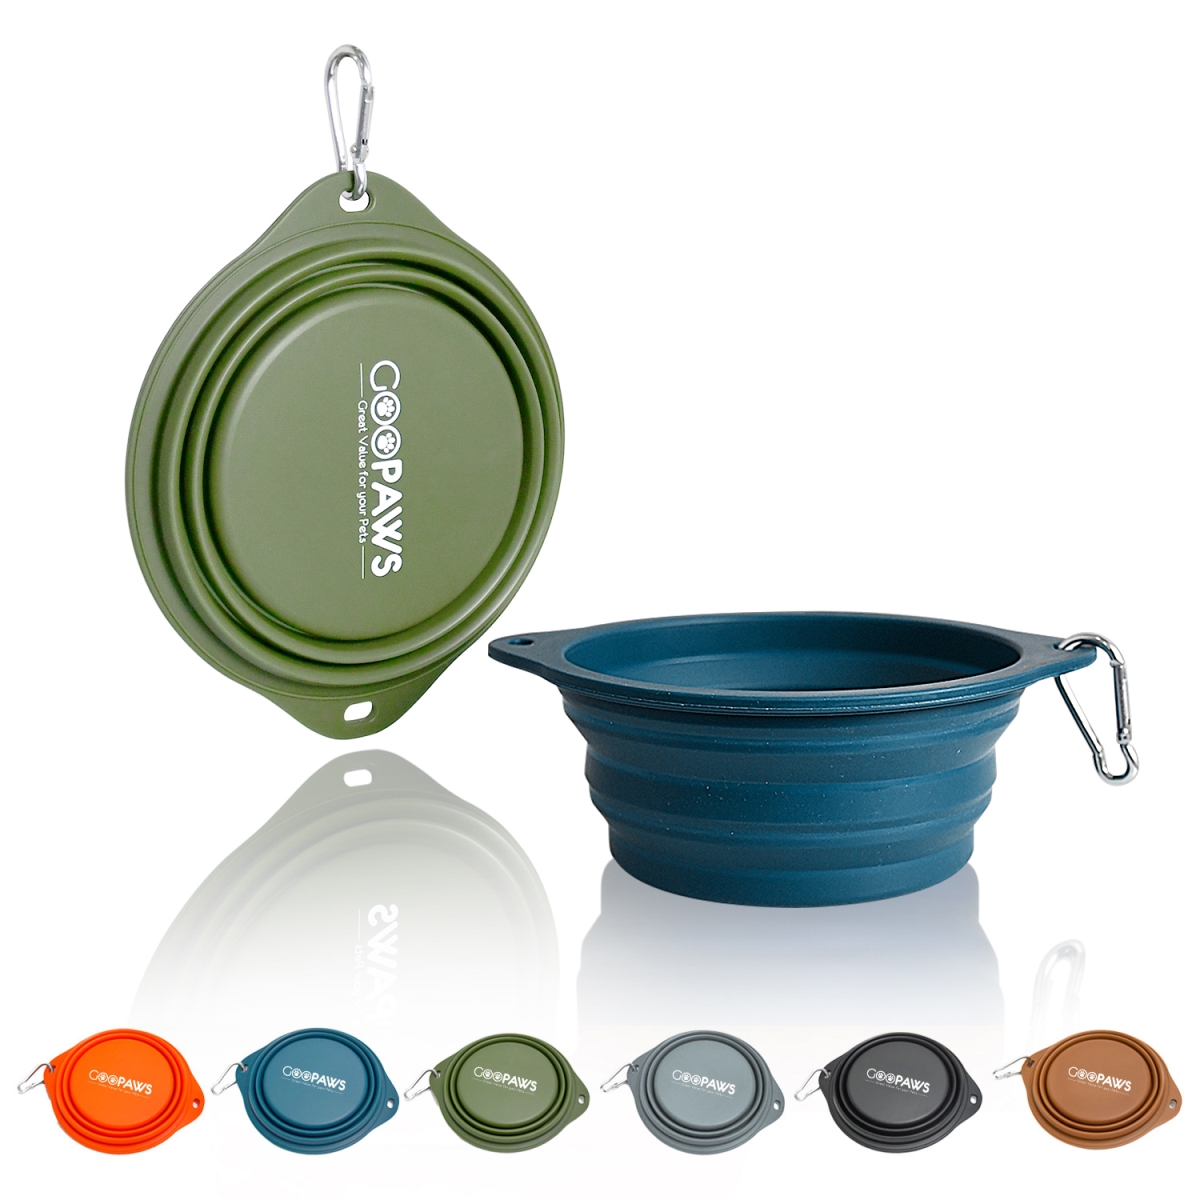 Picture of GOOPAWS GDB-16BLGN GOOPAWS GDB-16BKGR GOOPAWS 2 Pack Silicone Non-Skid Dog and Cat Bowl